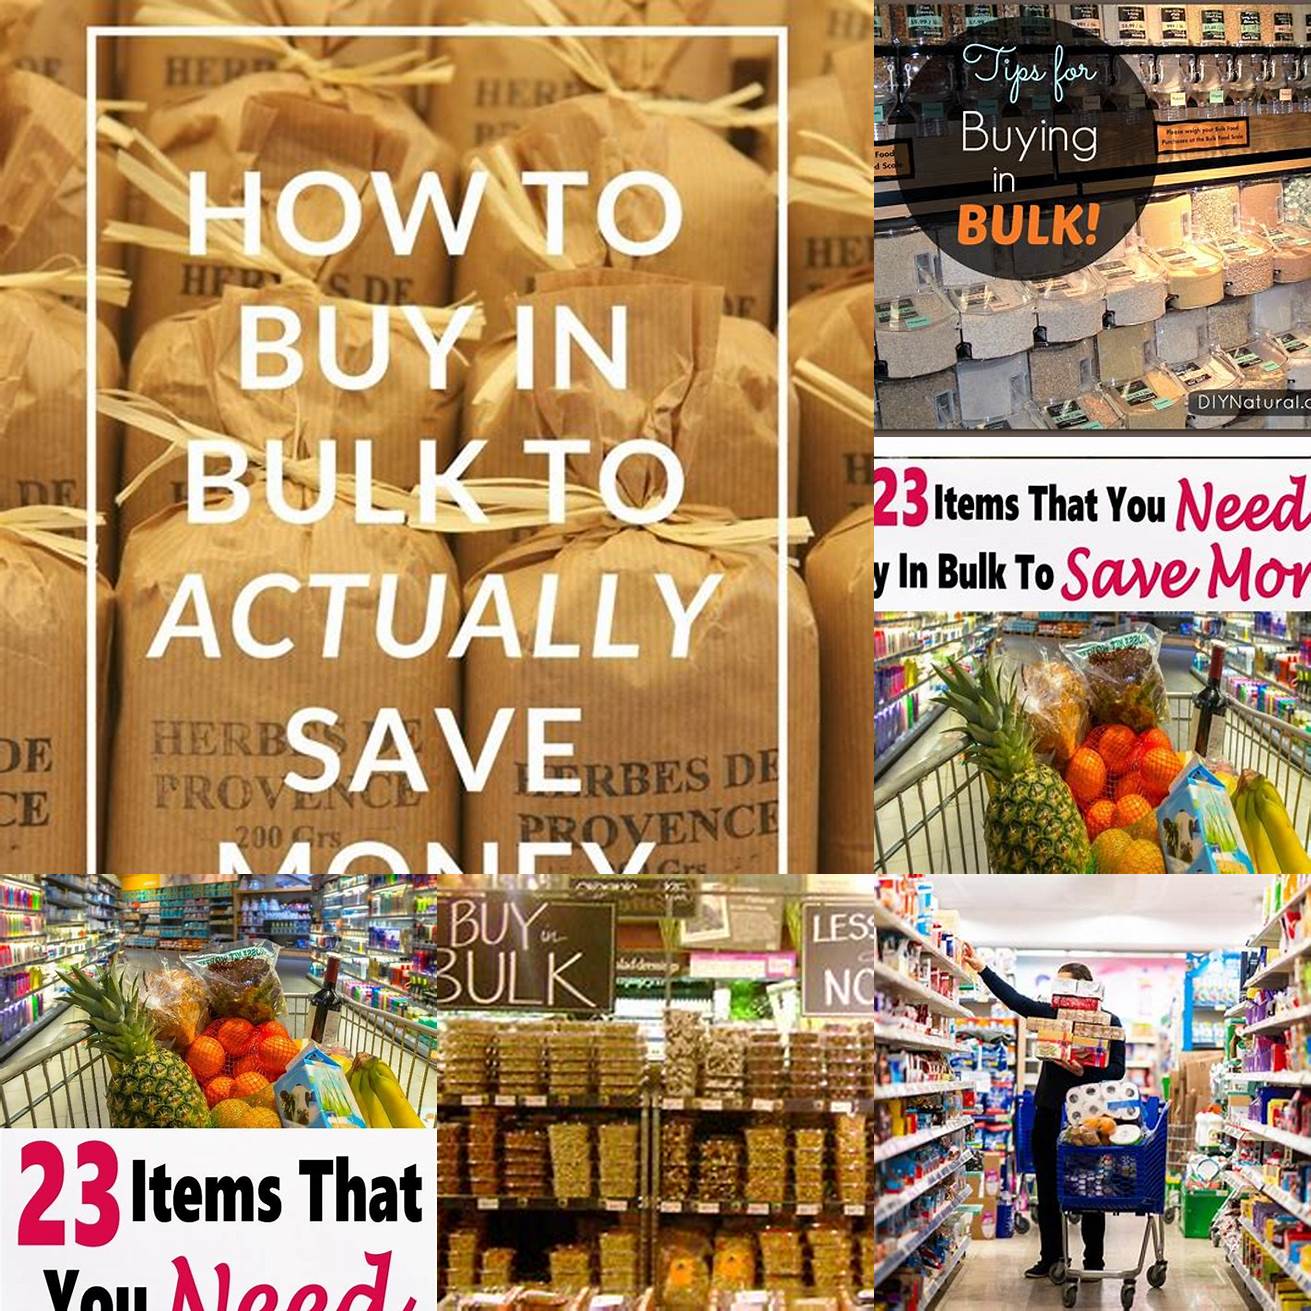 Cost savings By purchasing products in bulk retailers can save money on each product